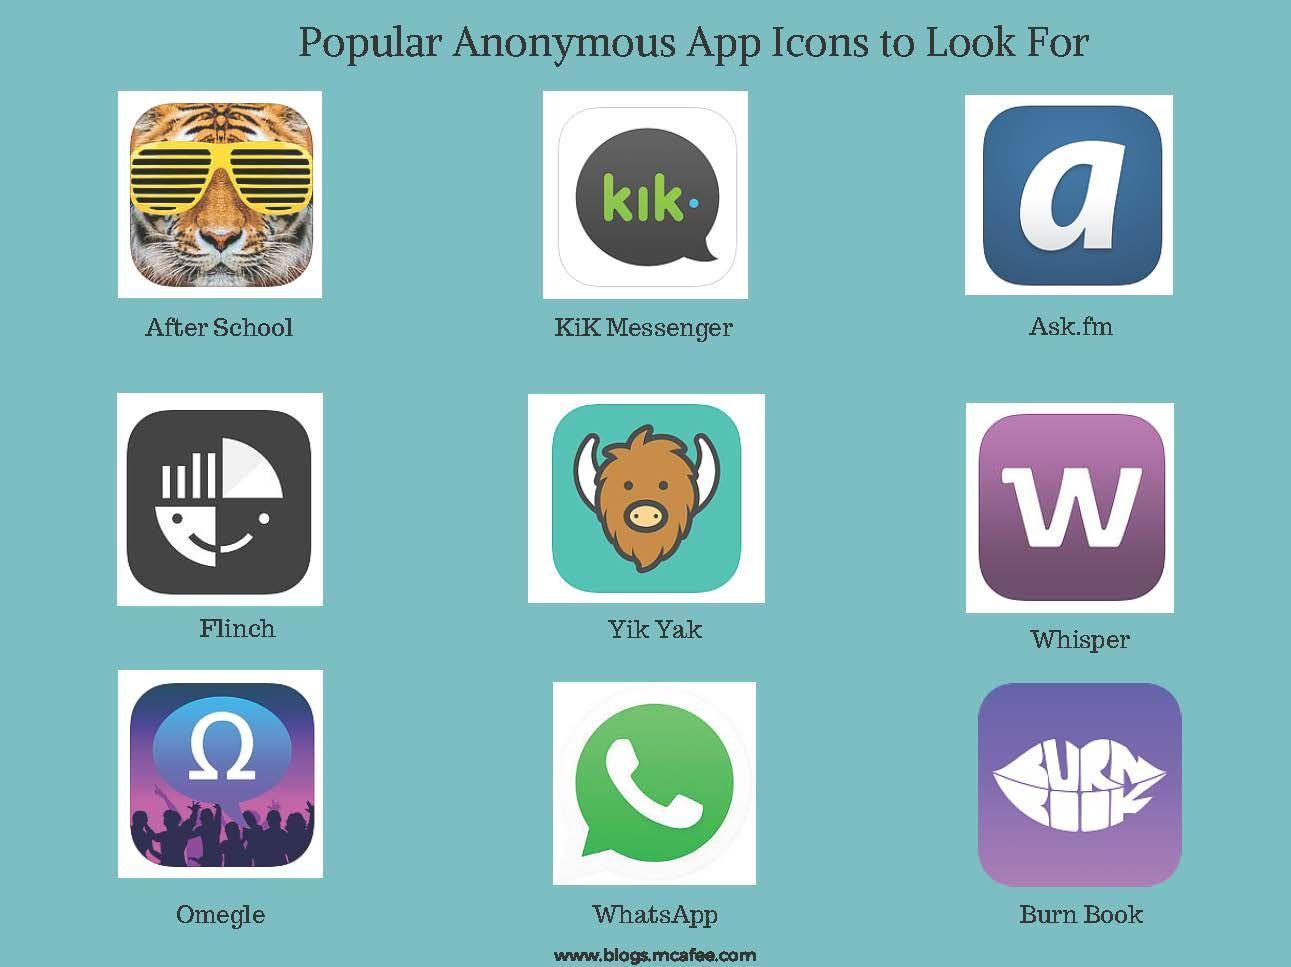 Popular Chat App Logo - Anonymous App 'After School' Gaining Popularity with Teens | McAfee ...